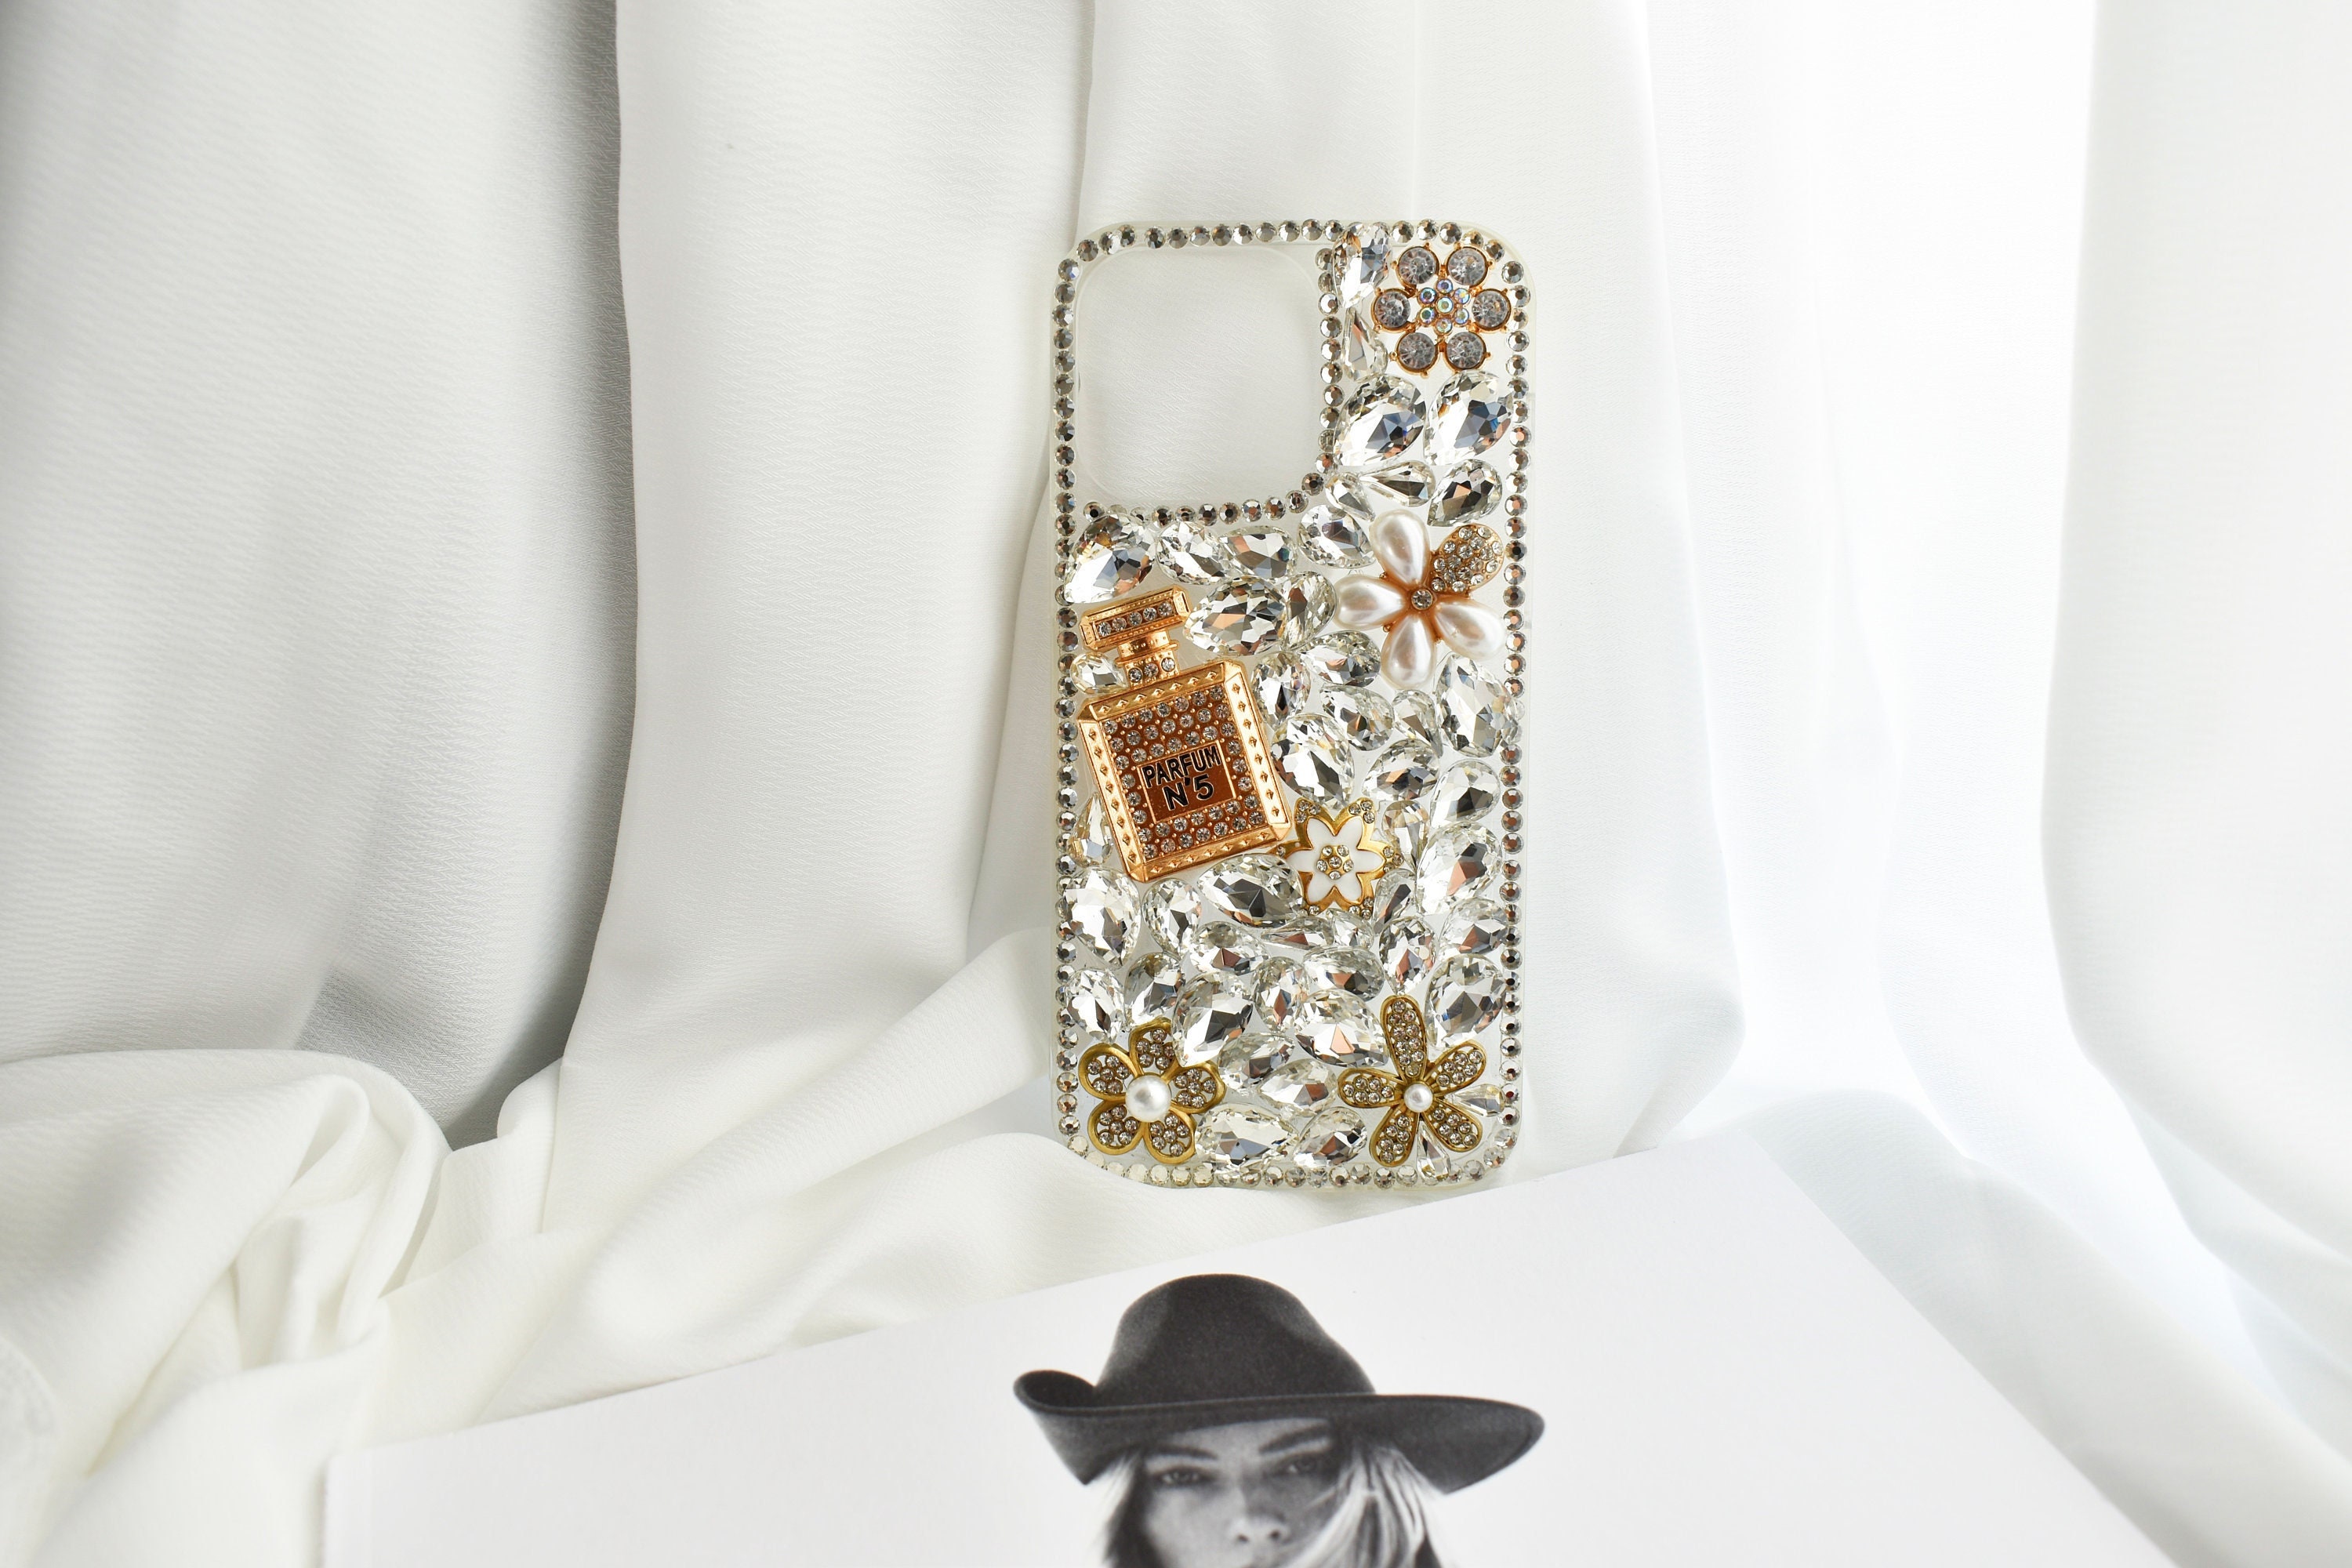 Faux Chanel No5 Perfume Bottle Phone Case! - Fashionicide // Fashion,  Makeup and Beauty - with a difference